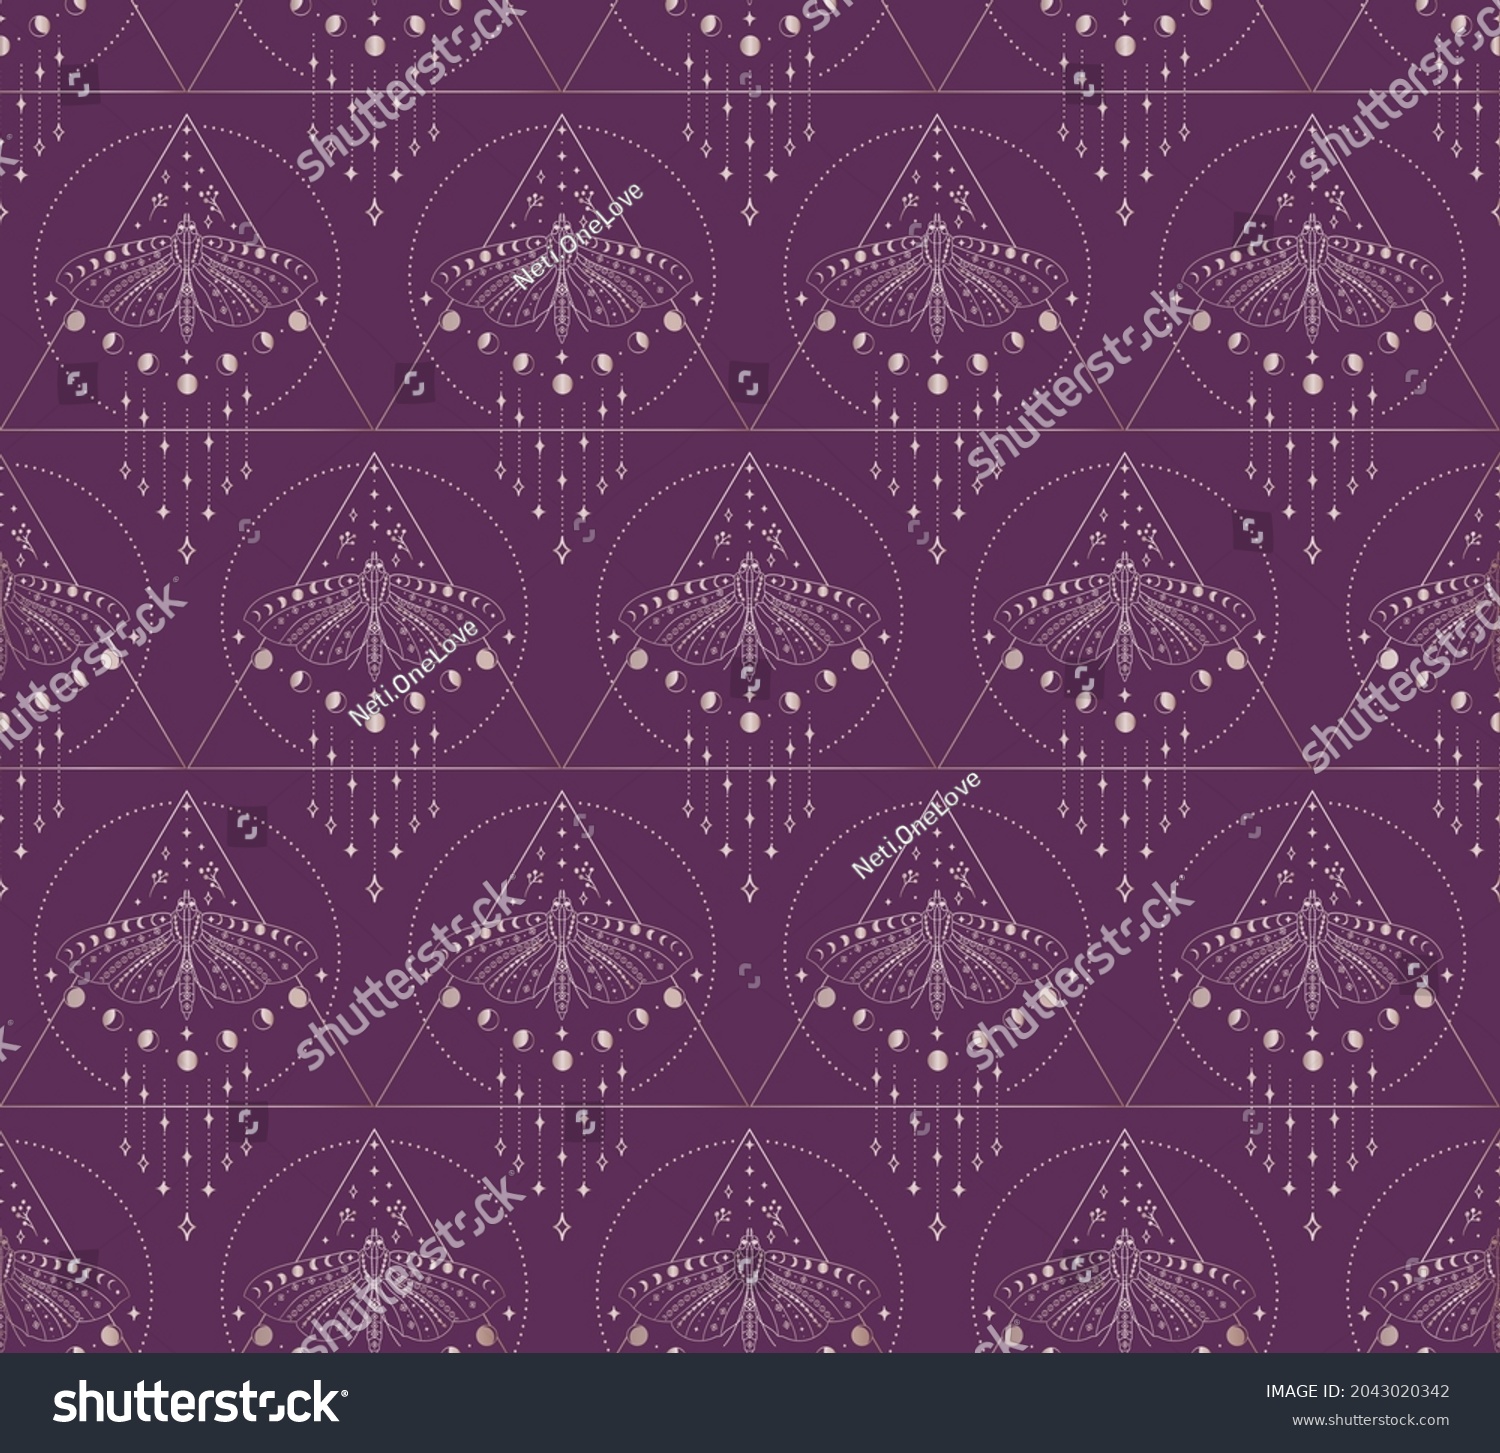 SVG of Abstract Background Seamless Pattern with Triangles, Circles, Moon Phases, Batterflies, branches, berries. Mystic Design, Vector Illustration for wrapping tissue paper. Pink Gold svg